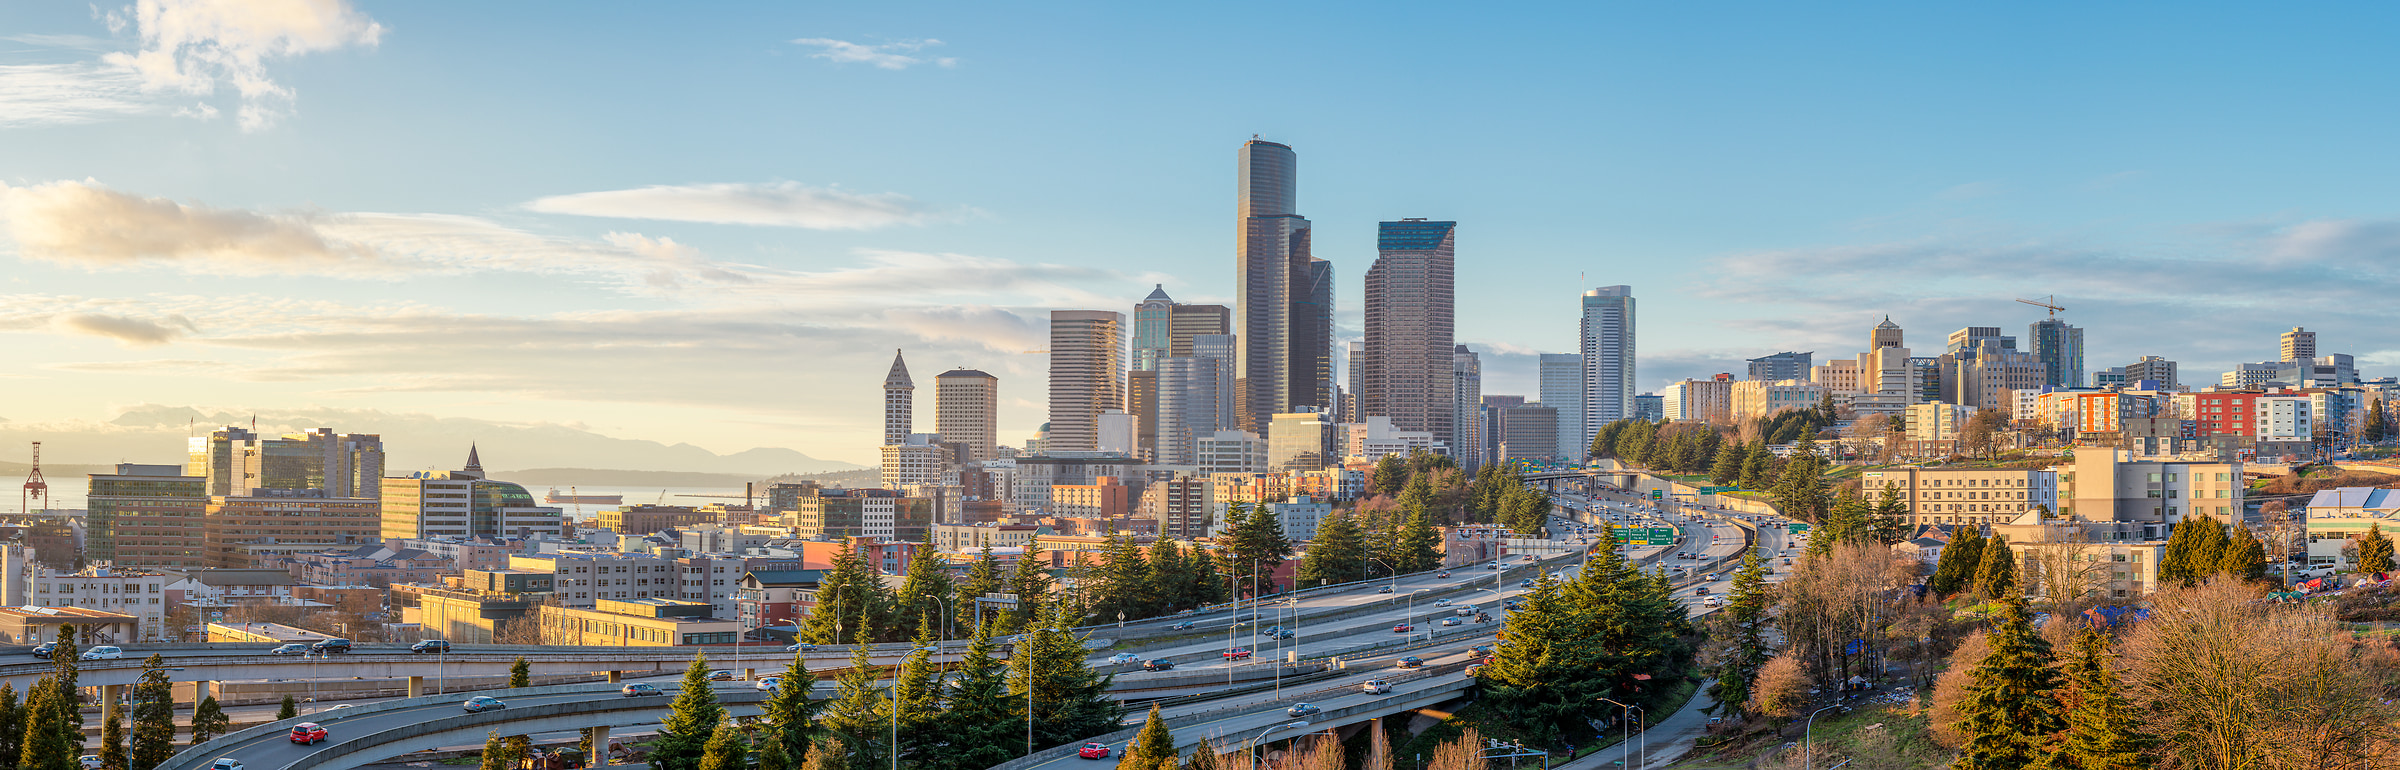 222 megapixels! A very high resolution, large-format, panorama photo print of the Seattle skyline during the day; photograph created by Greg Probst in Seattle, Washington.